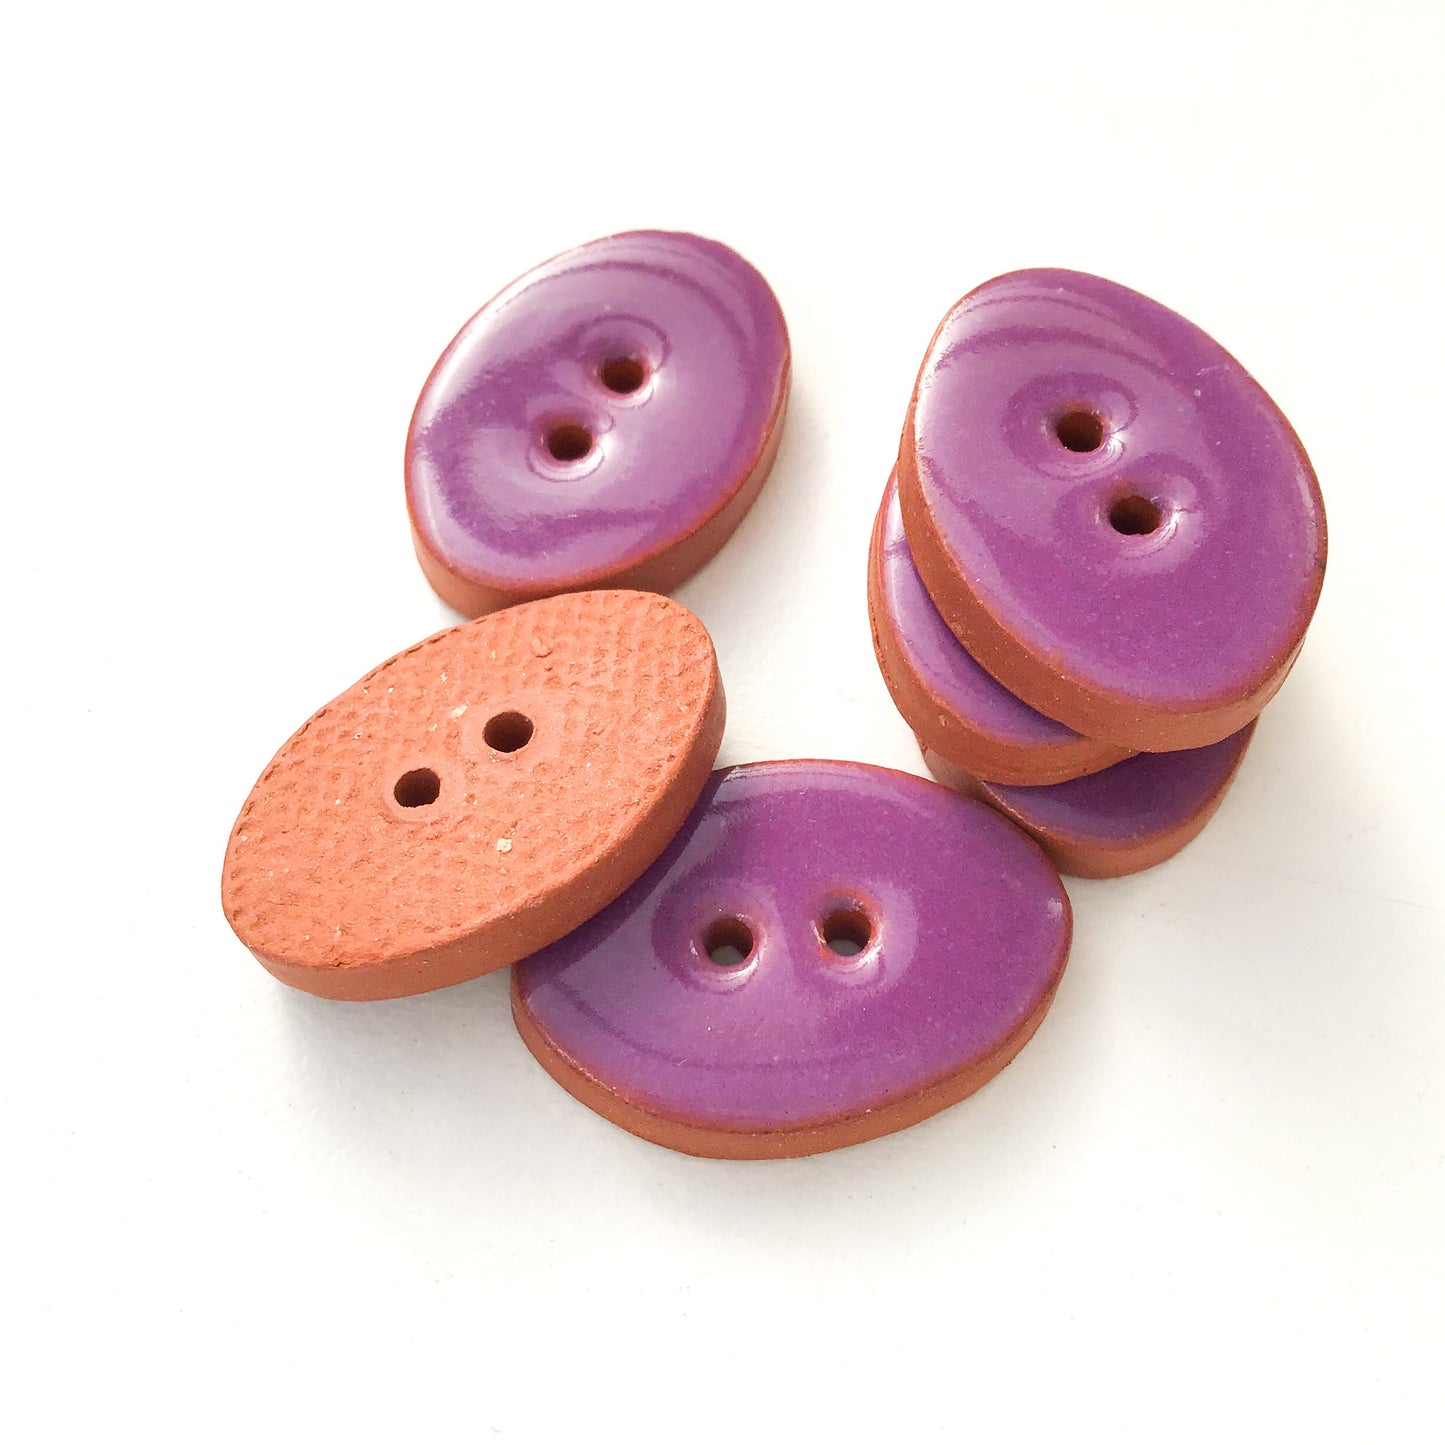 Grape Purple Oval Clay Buttons - 5/8" x 7/8" - 6 Pack (ws-92)